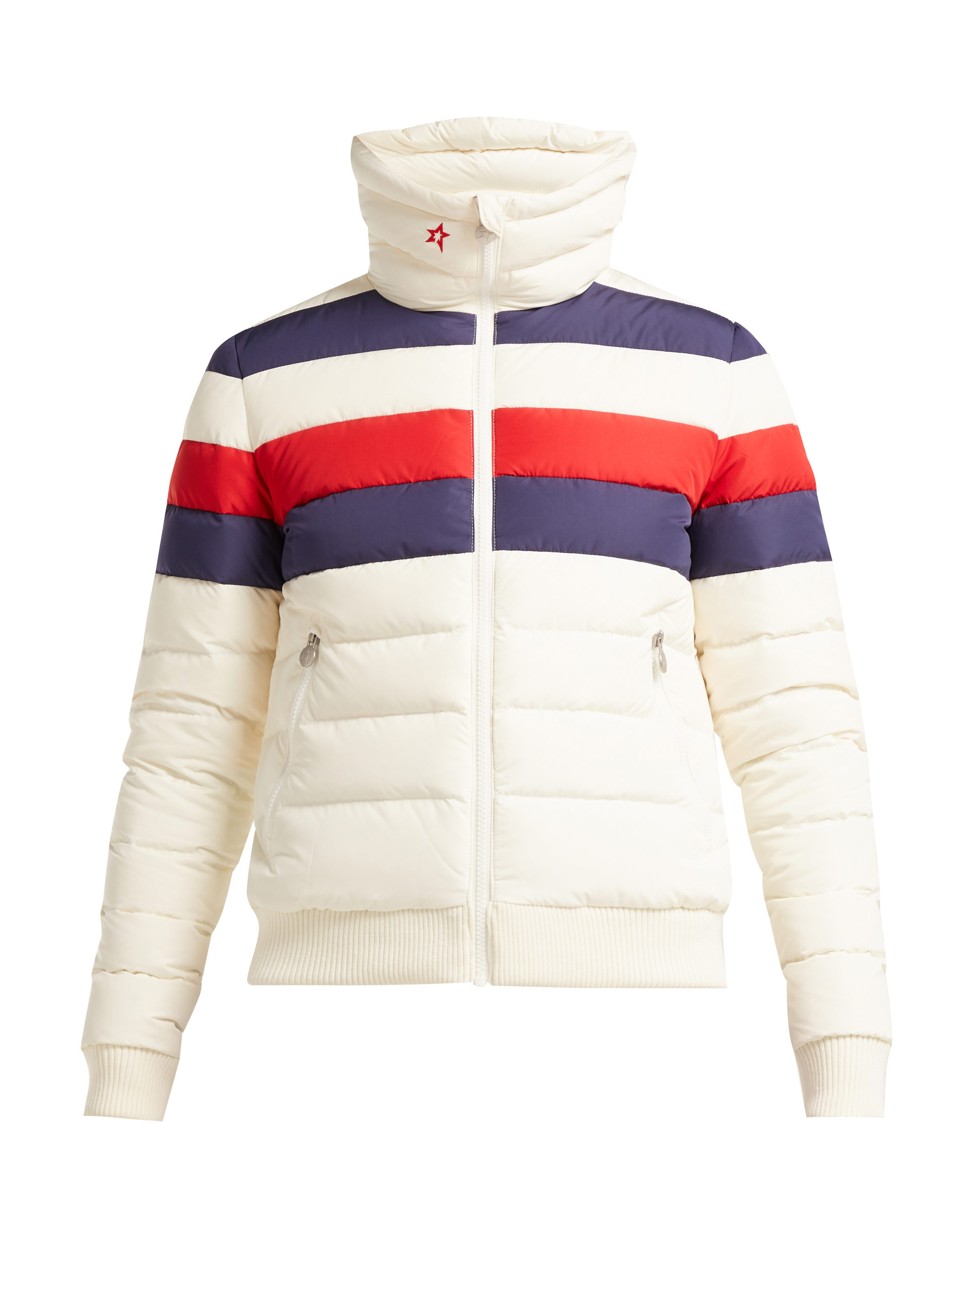 Perfect Moment jacket from matchesfashion.com.